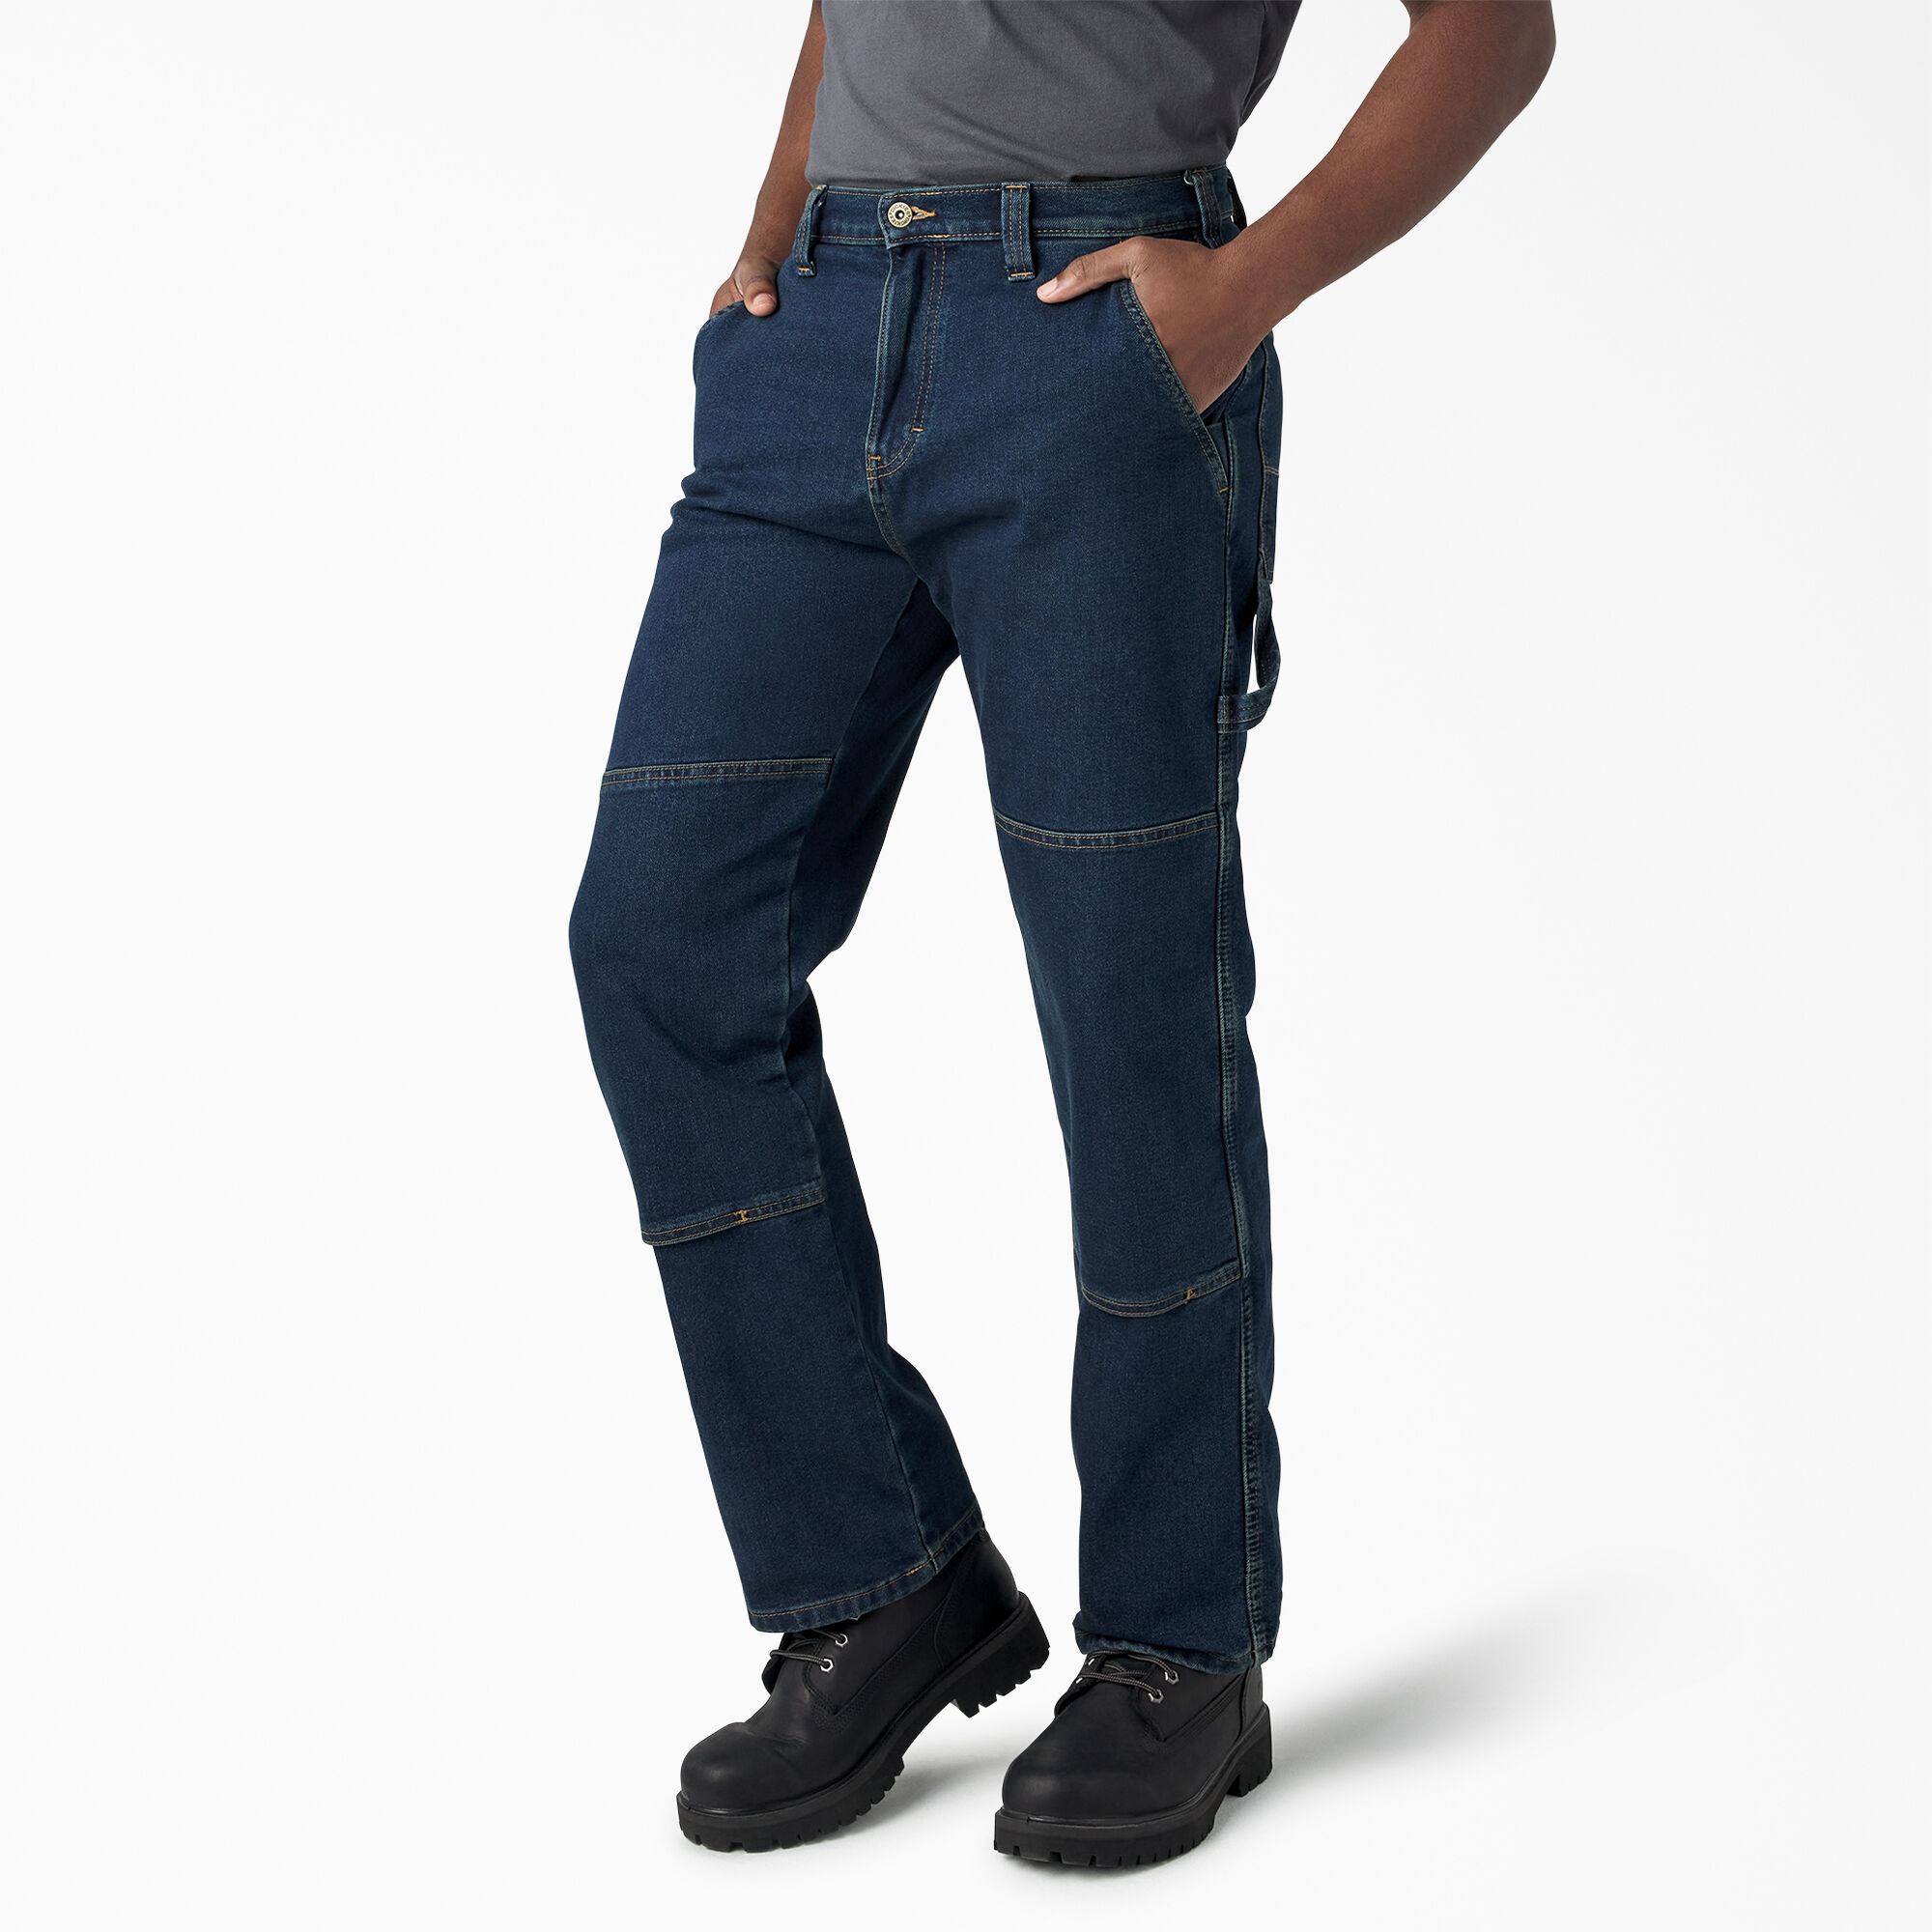 FLEX Relaxed Fit Double Knee Jeans